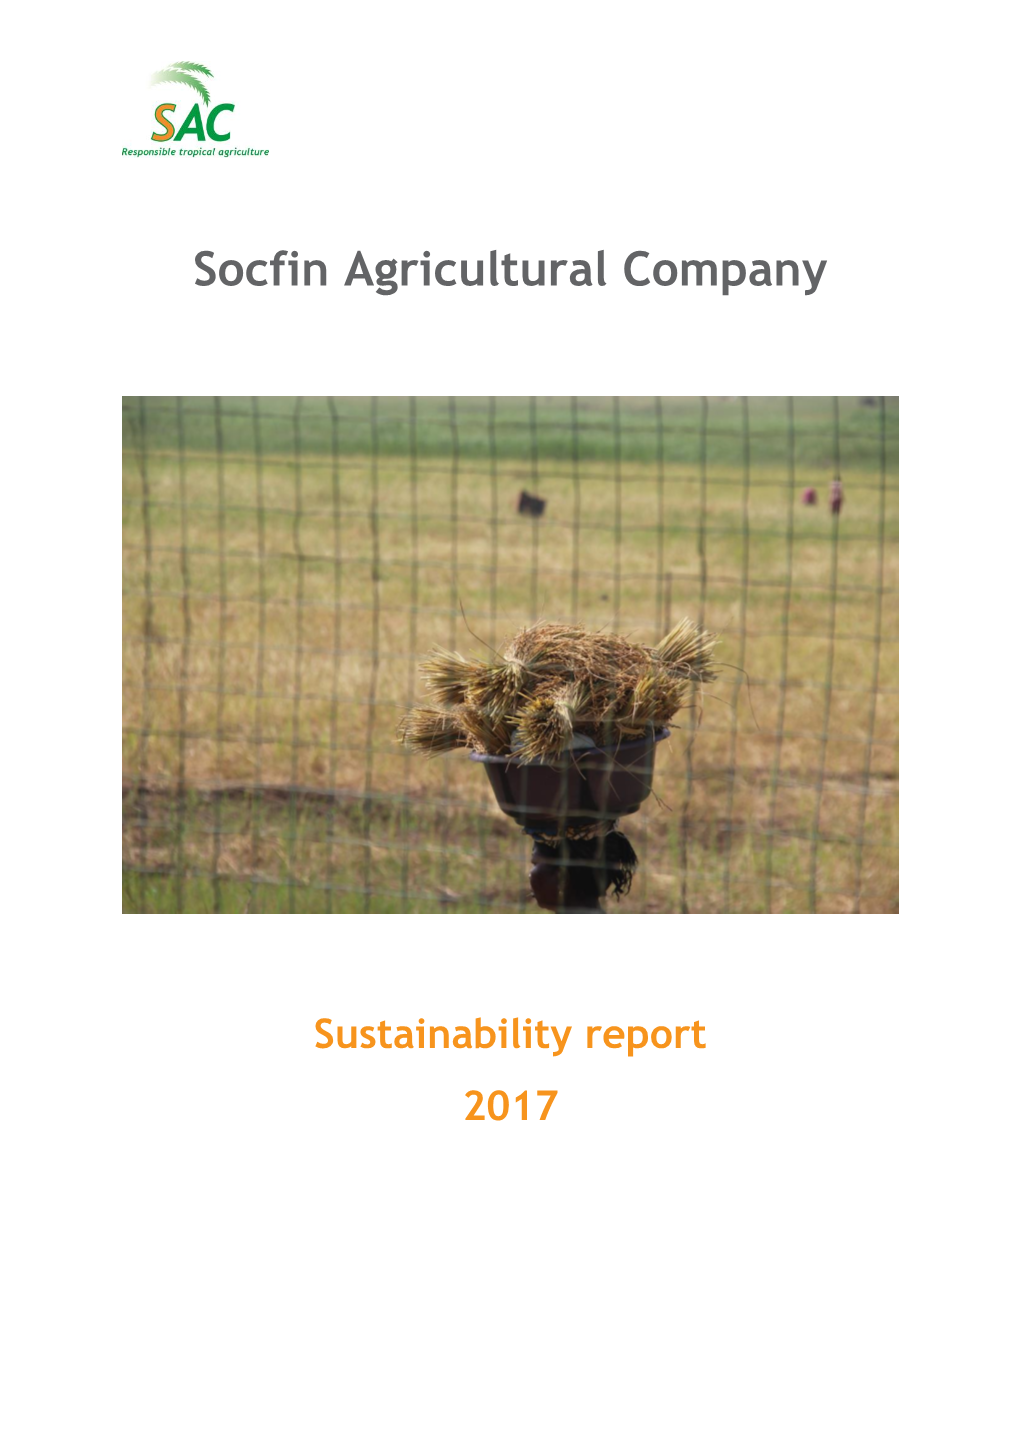 Socfin Agricultural Company